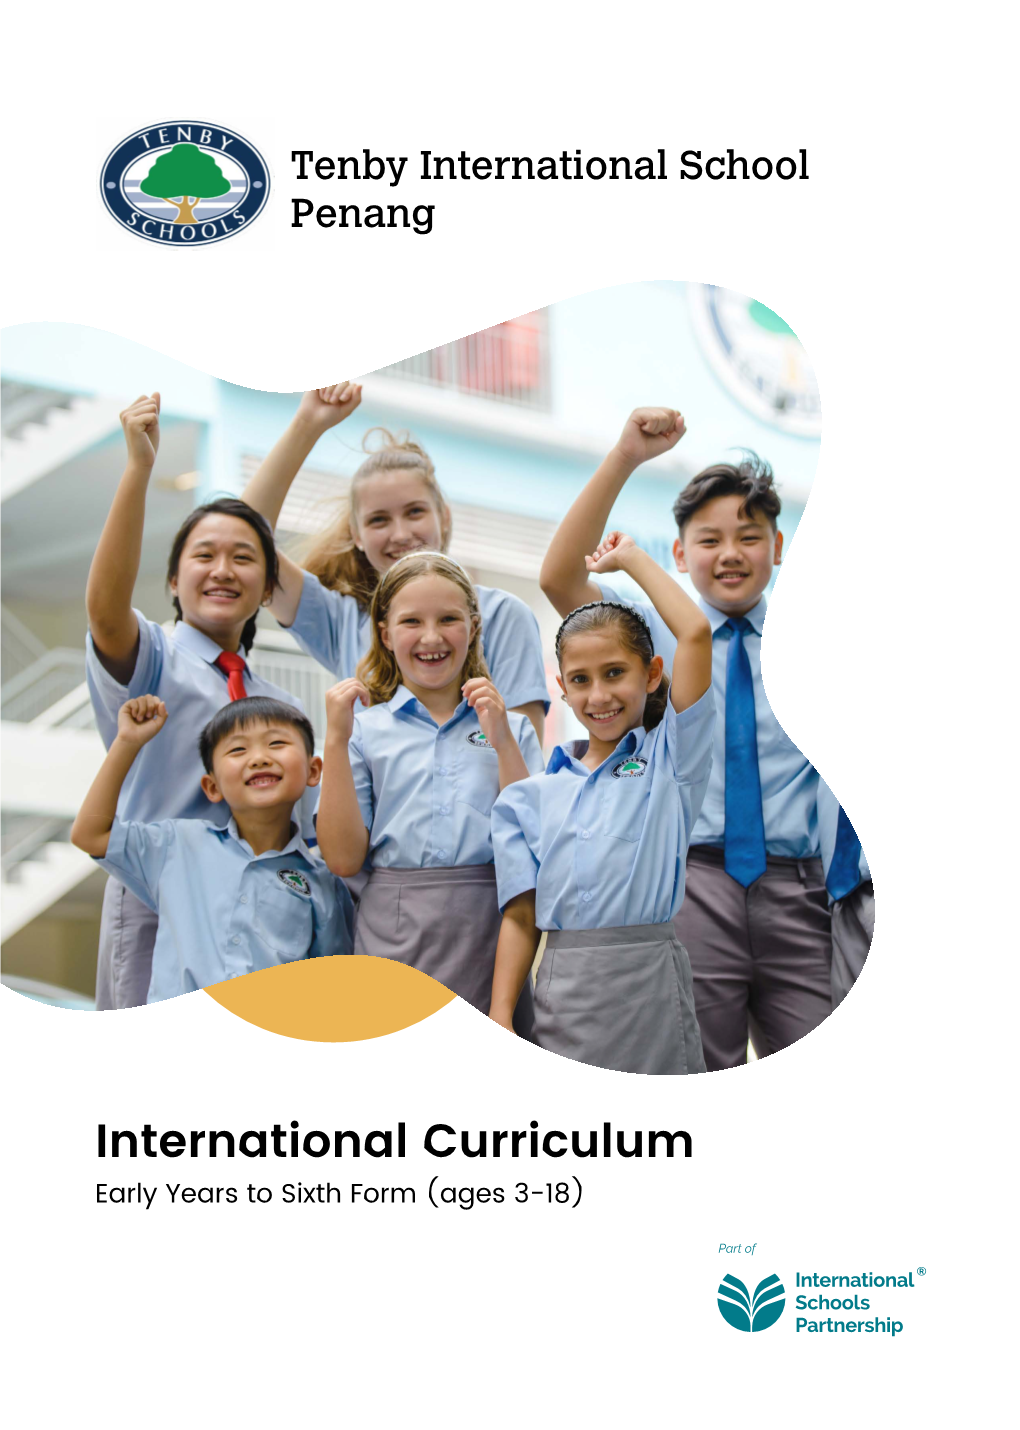 International Curriculum Early Years to Sixth Form (Ages 3-18) Academic Welcome from the Pathway Campus Principal